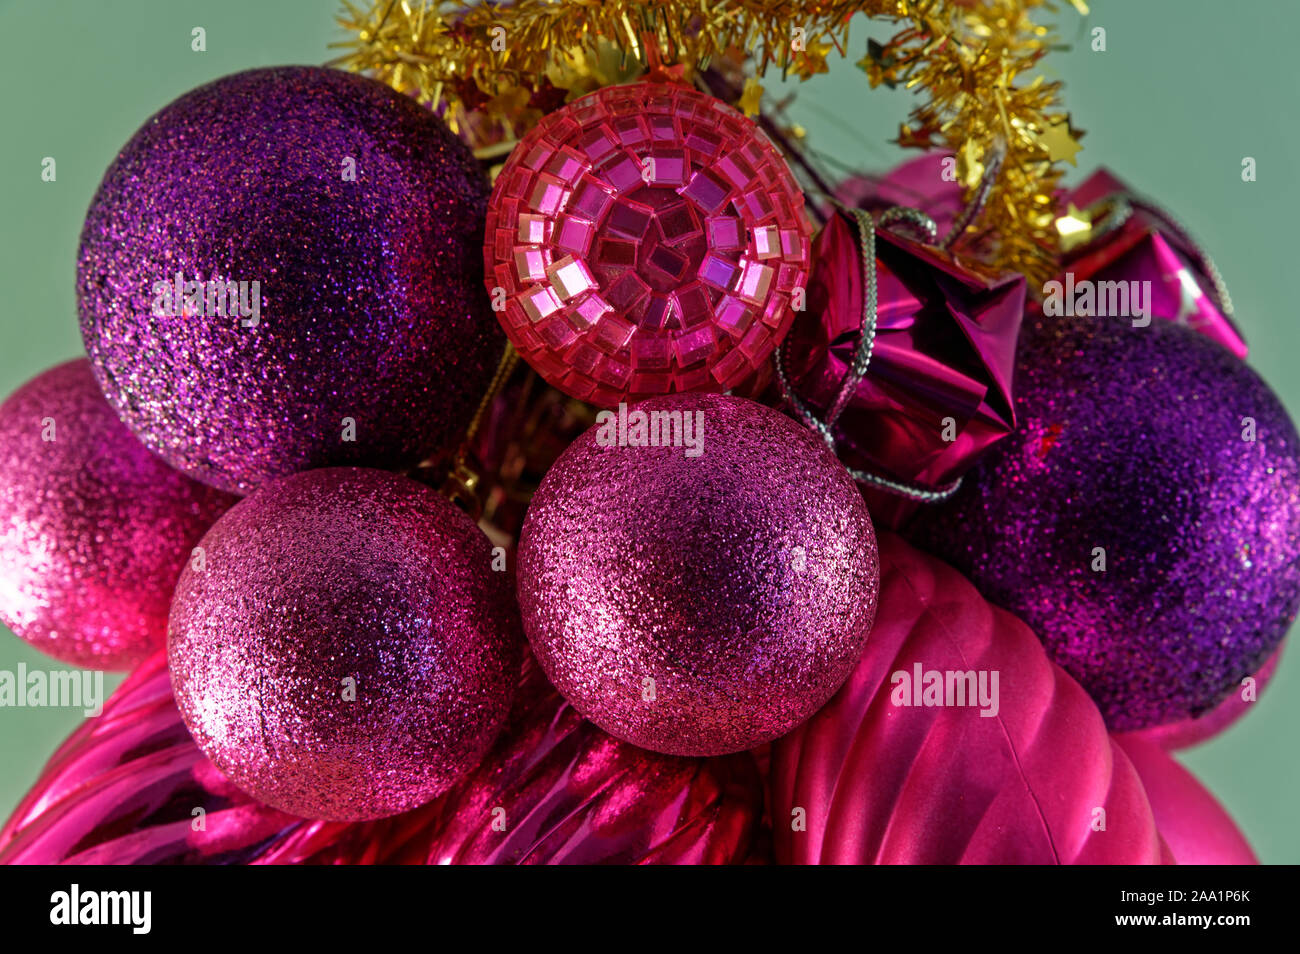 Purple and red Christmas decorations with gold tinsel on a green background Stock Photo